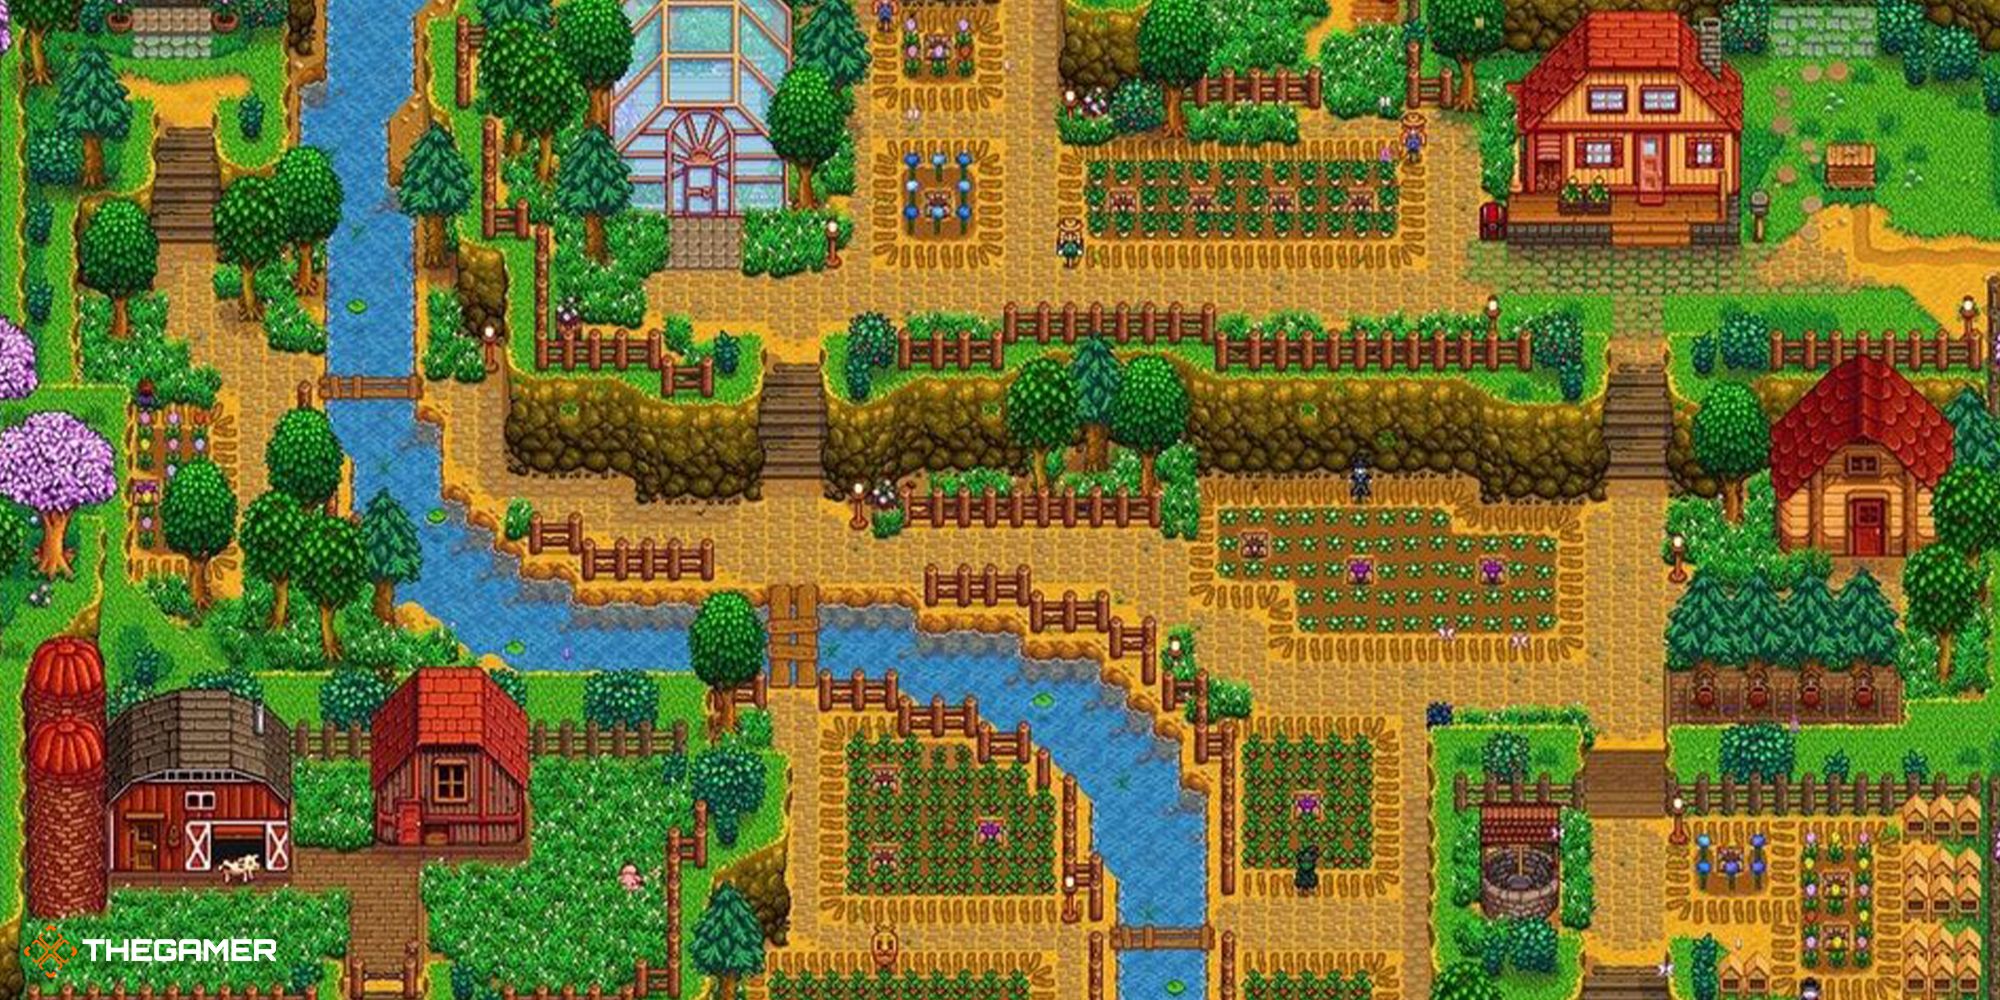 A fully populated Hilltop Farm in Stardew Valley, filled with crops and animal houses